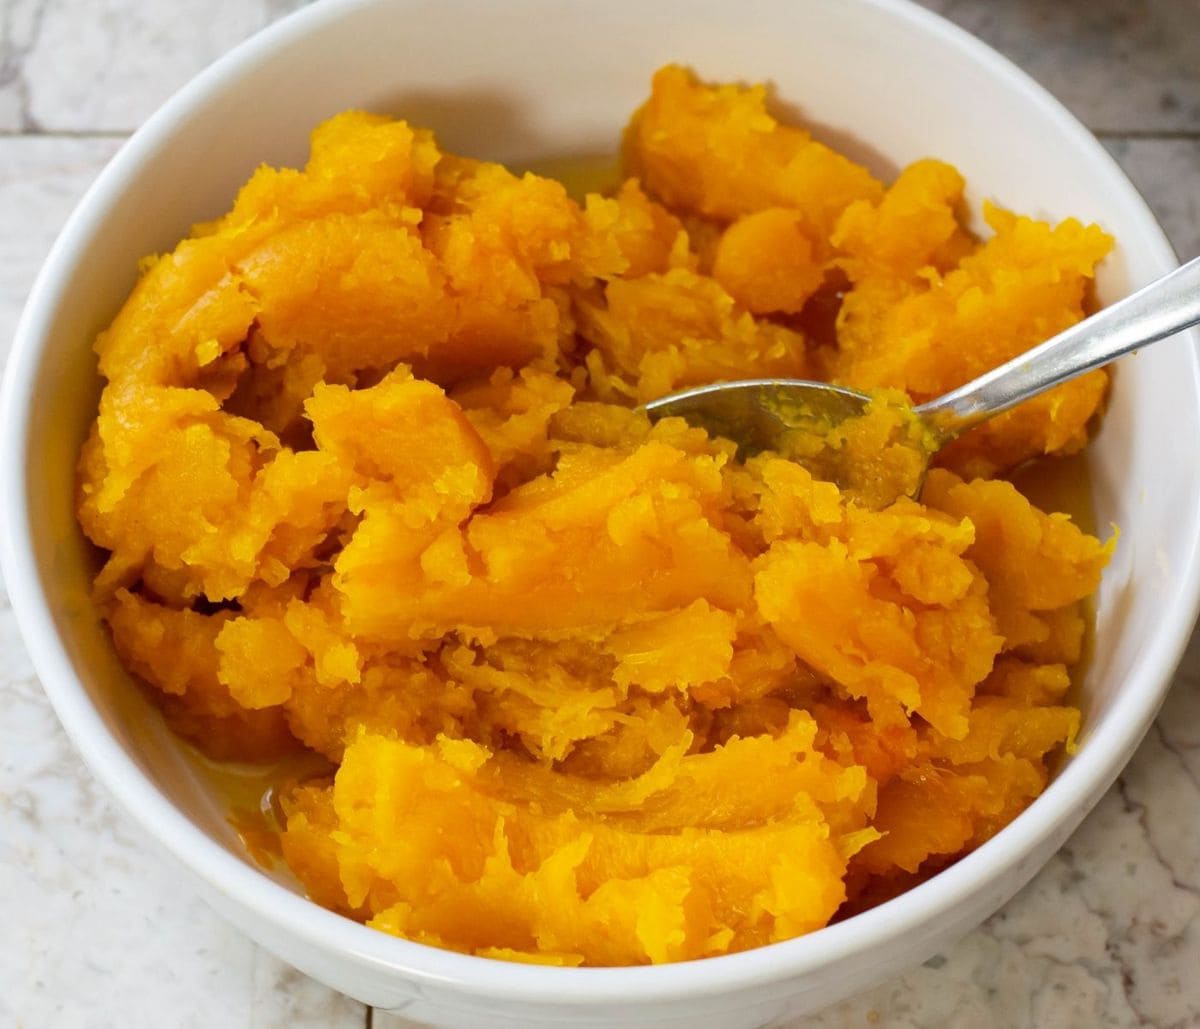 A overhead image of a bowl filled with pumpkin puree.